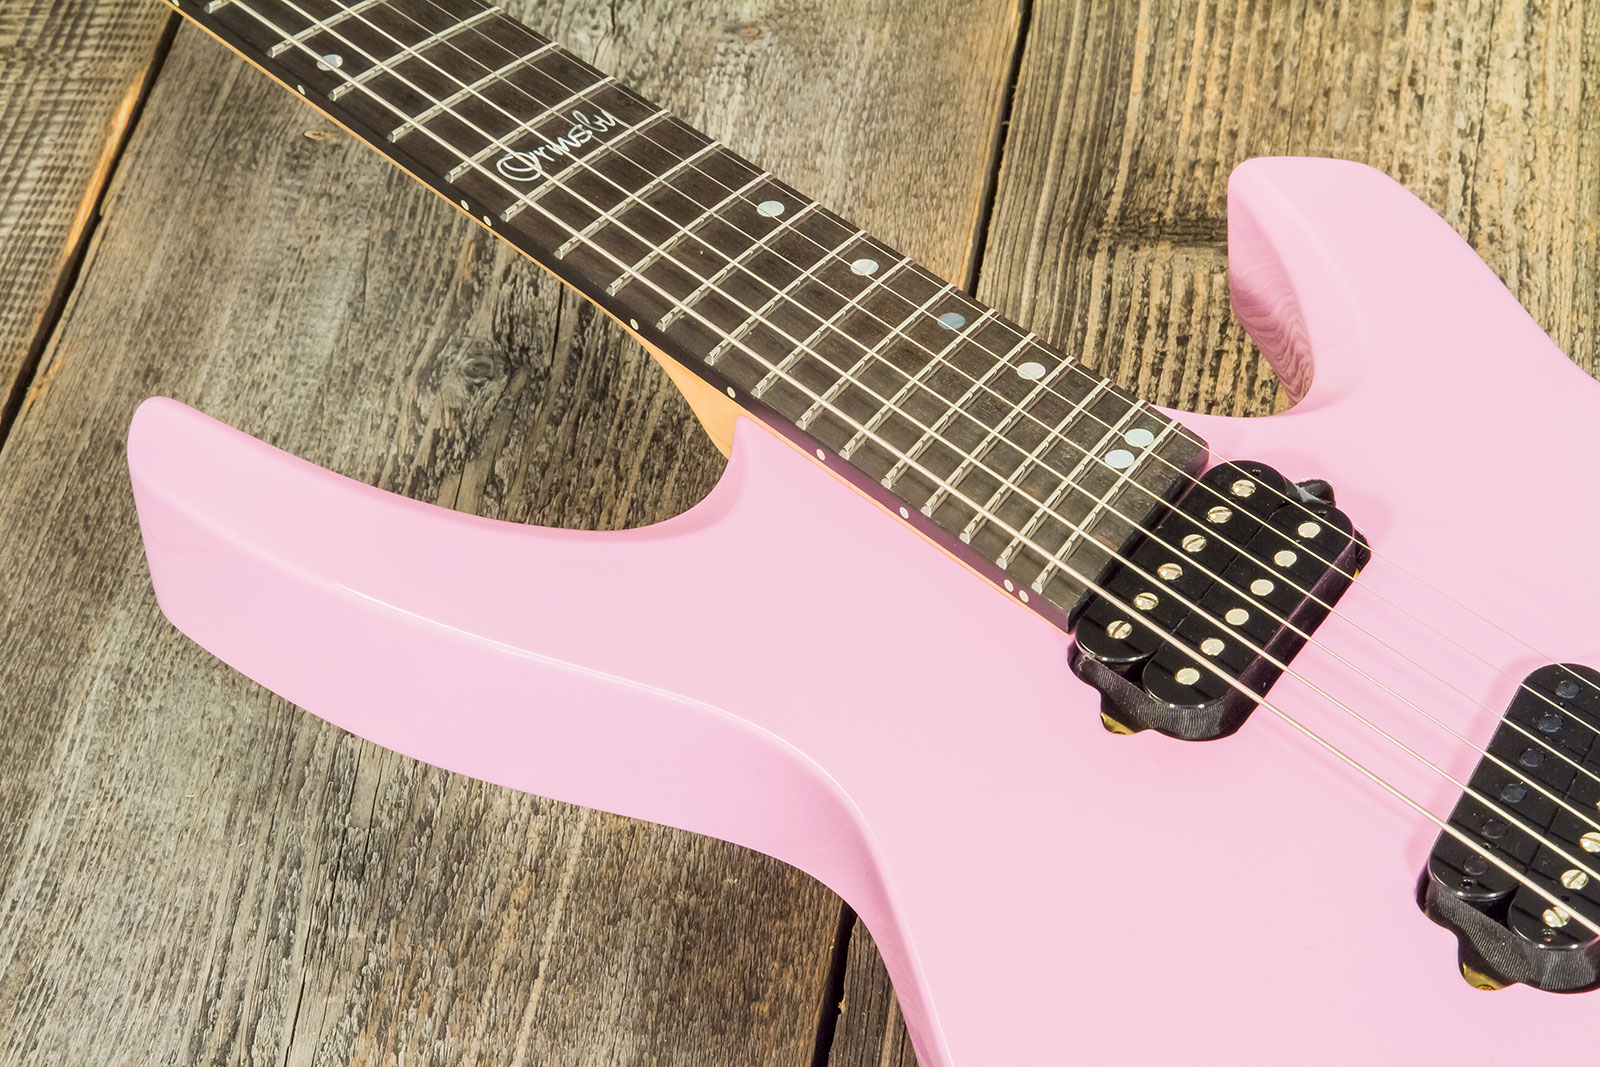 Ormsby Goliath Headless Gtr Run 14c Multiscale 2h Ht Eb - Shell Pink - Multi-Scale Guitar - Variation 2